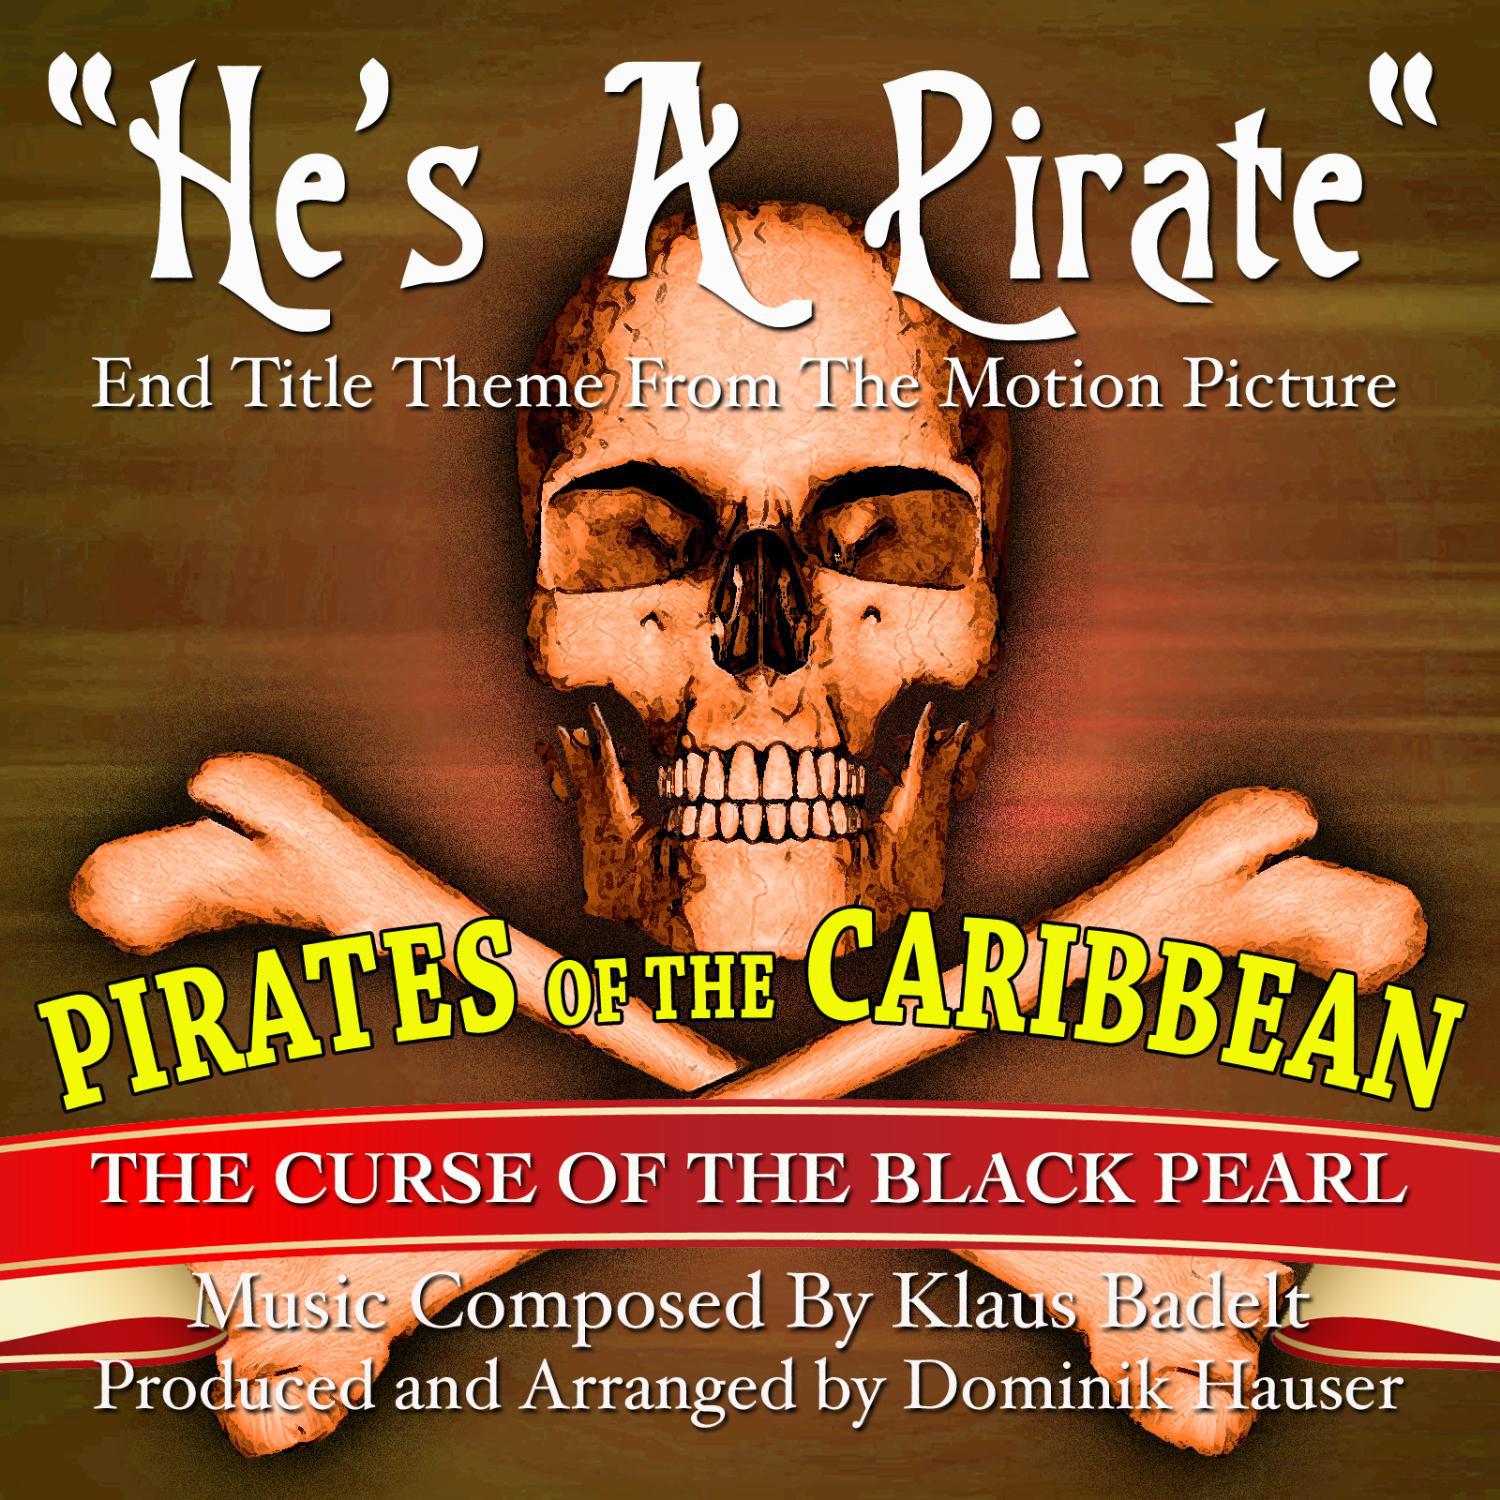 "He's A Pirate" End Title Theme from the Motion Picture "Pirates of the Caribbean"